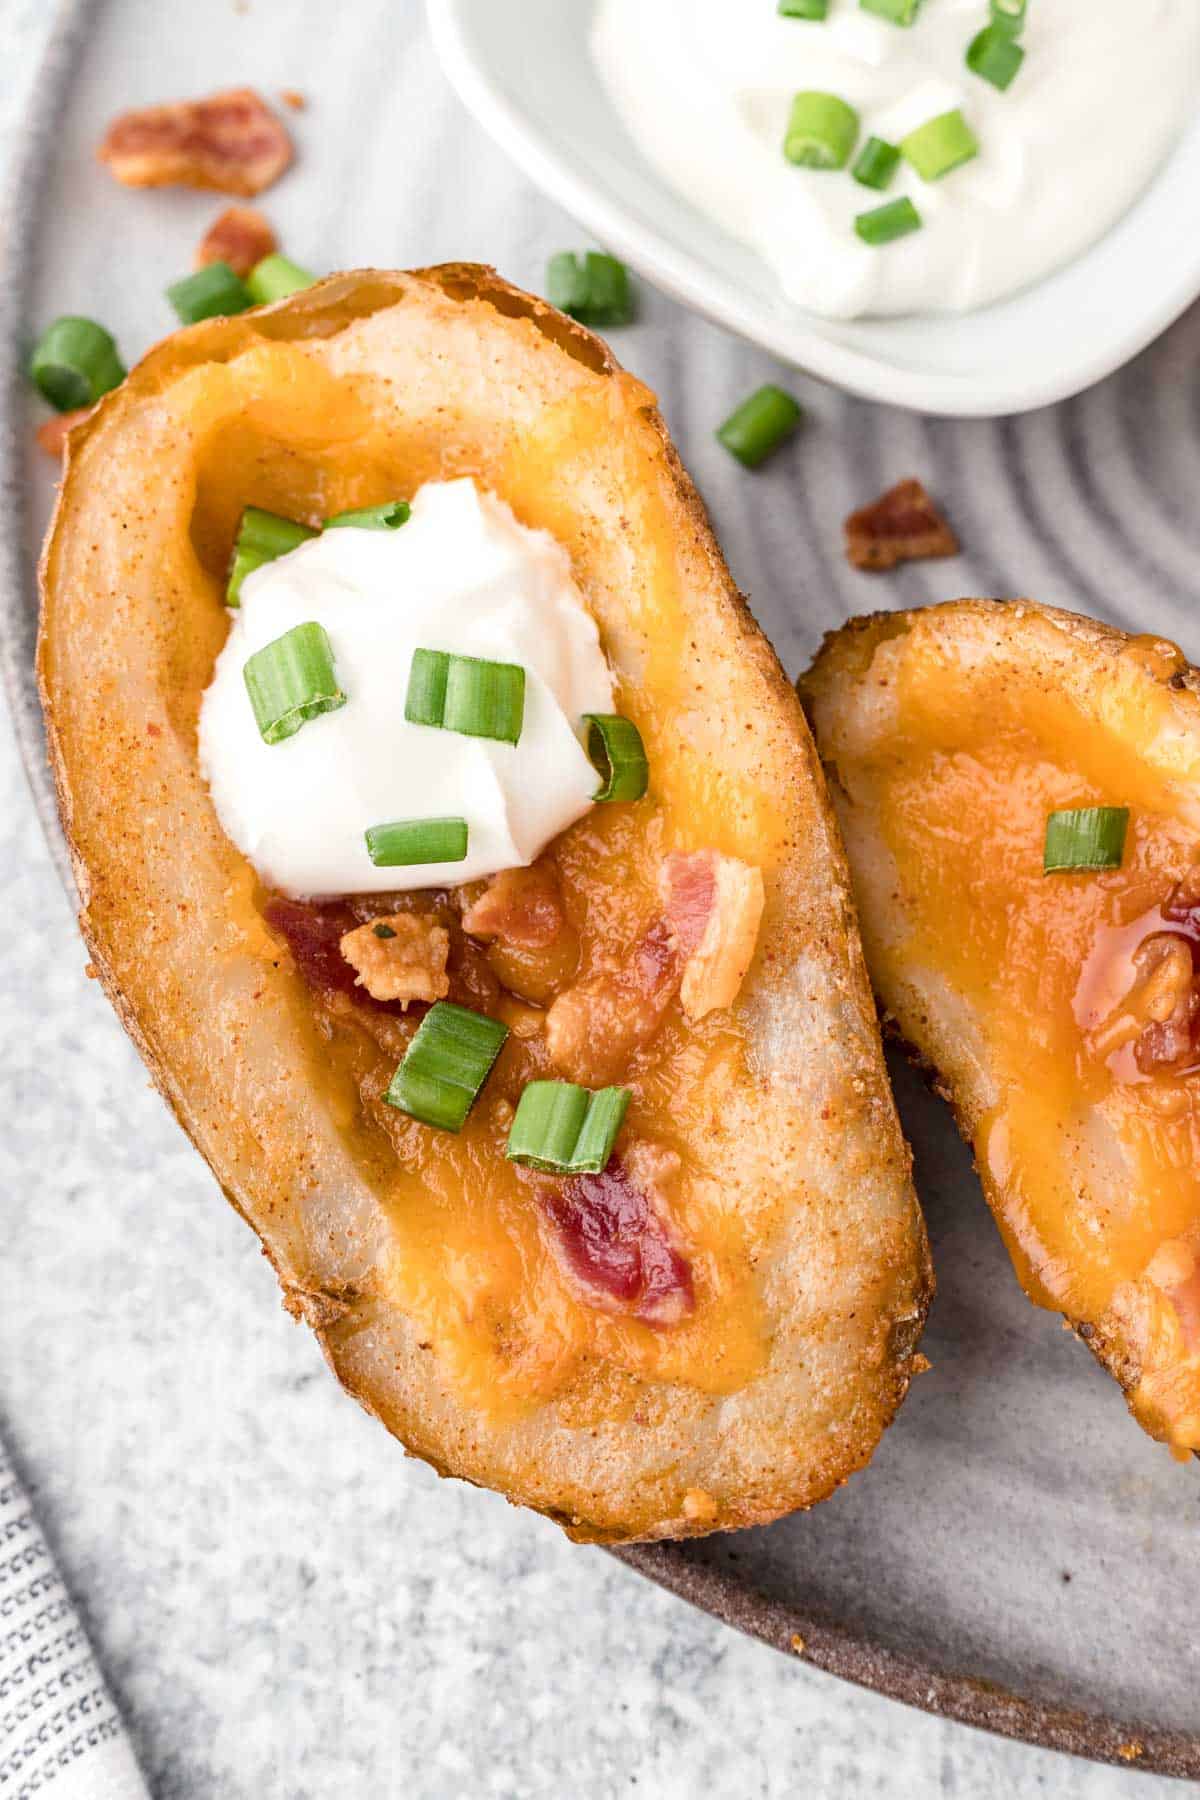 An up-close image of a baked potato skin layered with melted cheese, crispy bacon, sour cream, and sliced green onions.